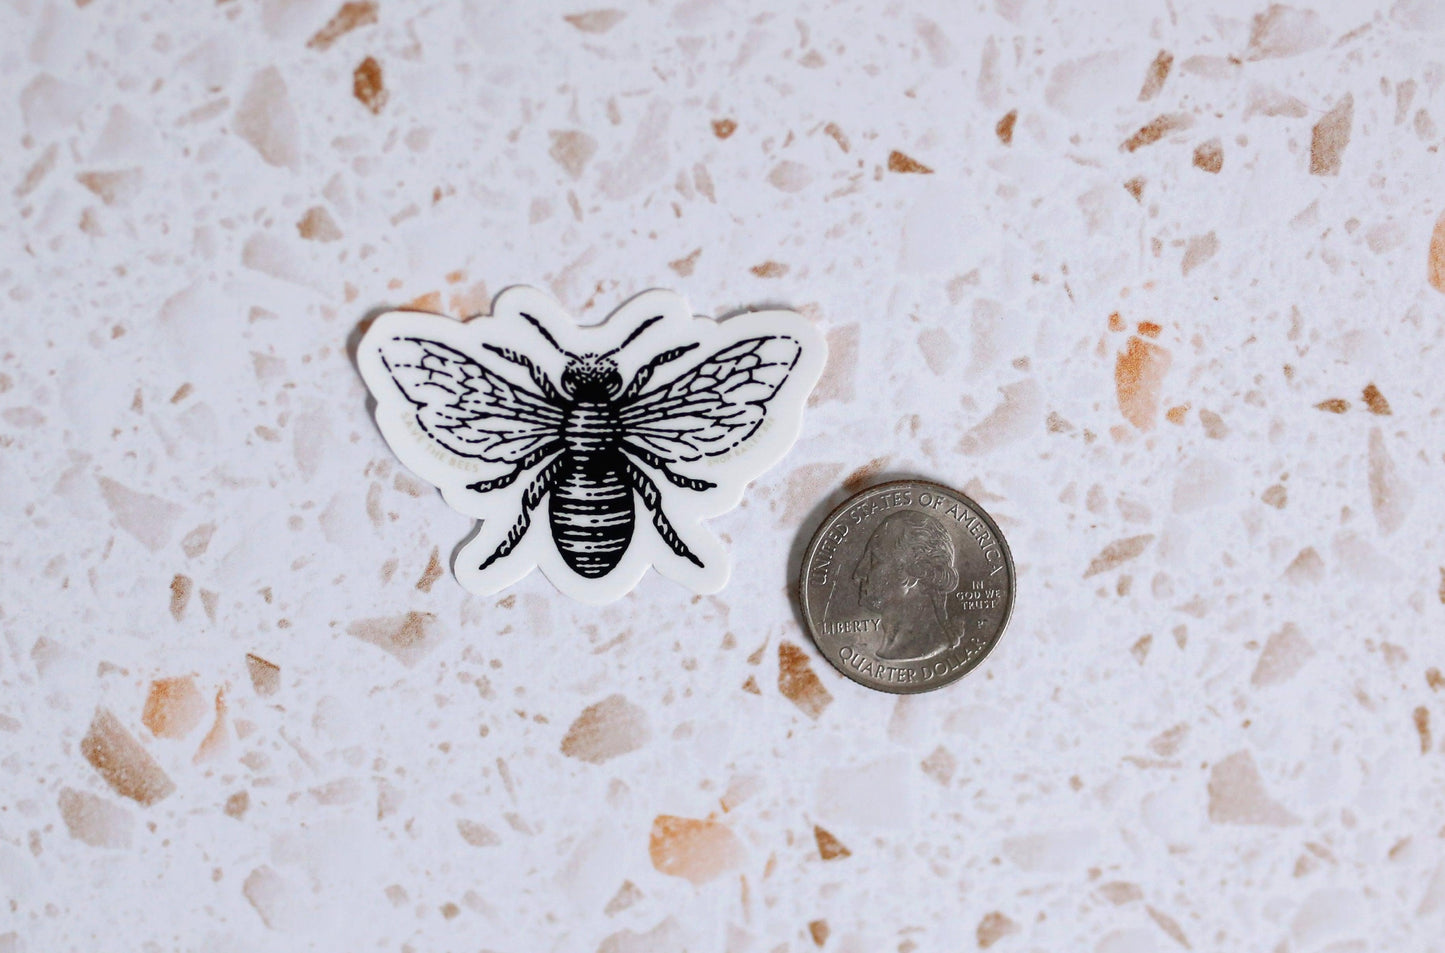 save the bees sticker next to a quarter for size comparison